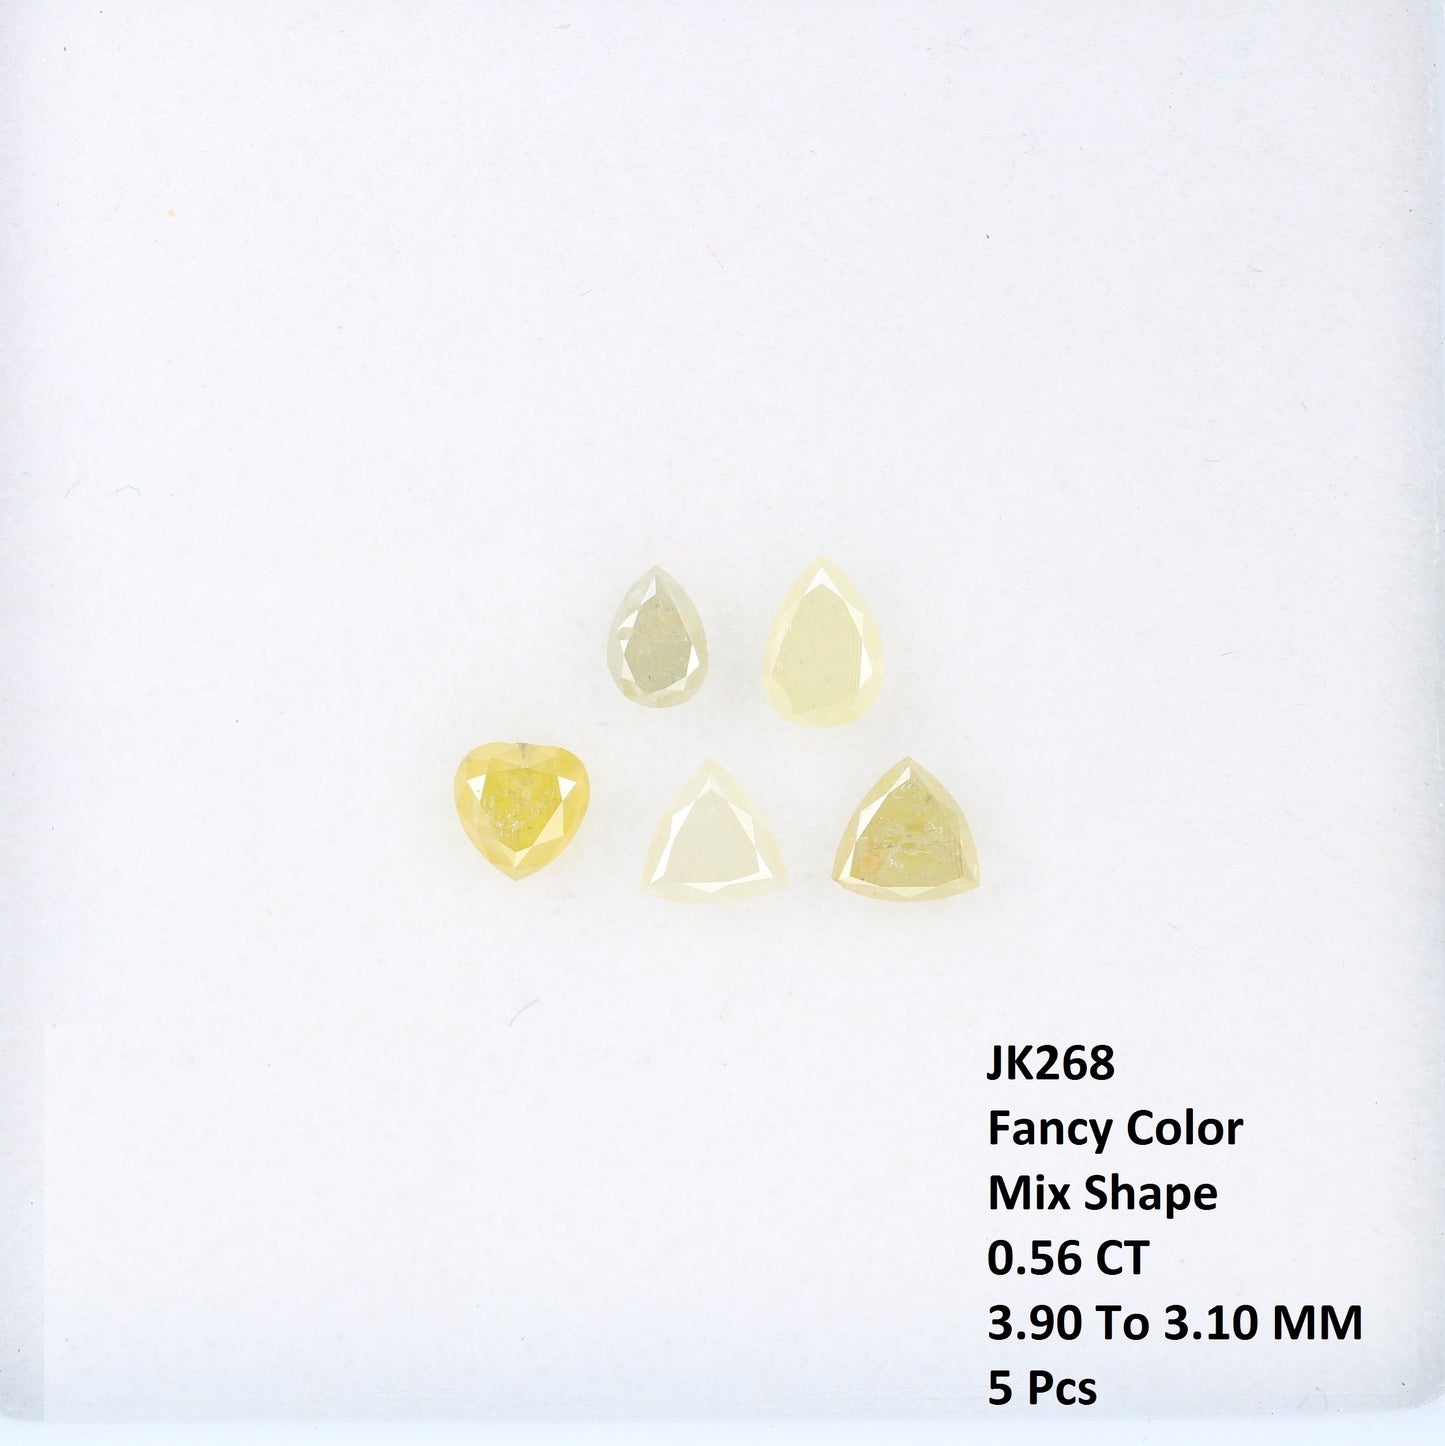 0.56 CT Mix Shape Fancy Colored 3.10 To 3.90 MM Diamond For Designer Jewelry